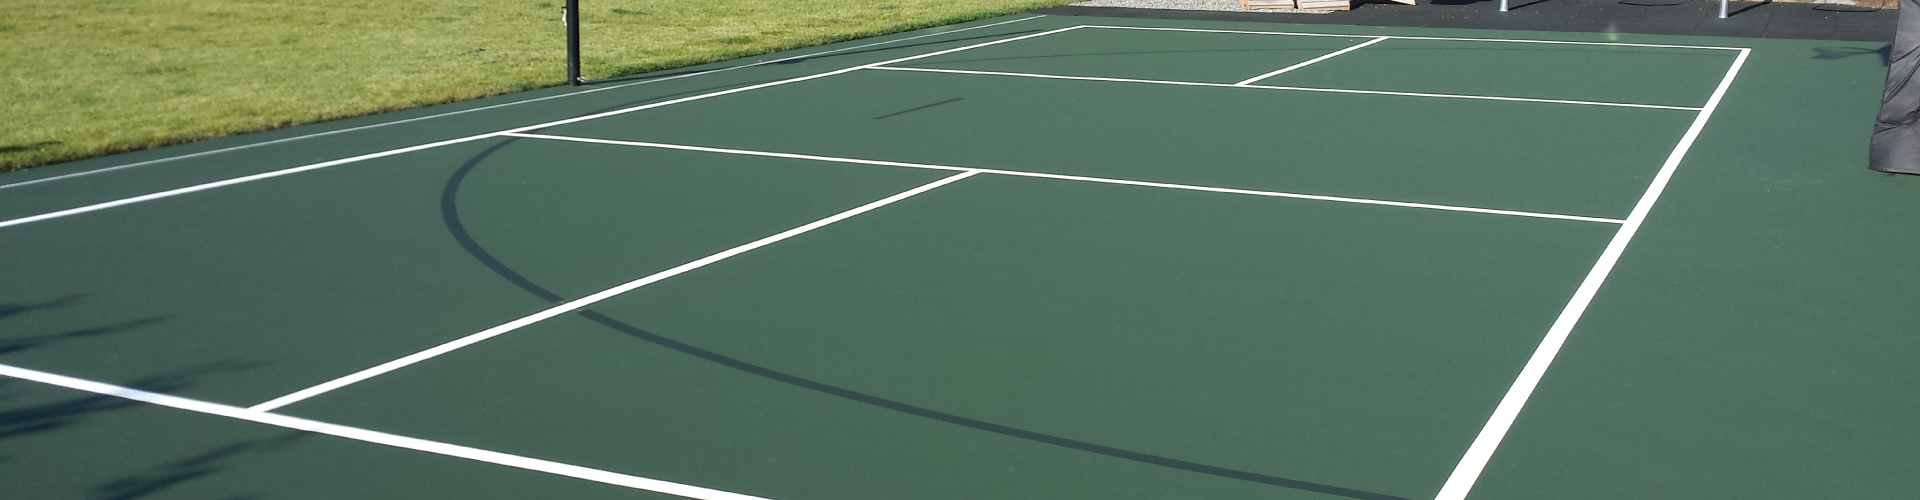 NW Court Consultants Tennis Court Surfacing